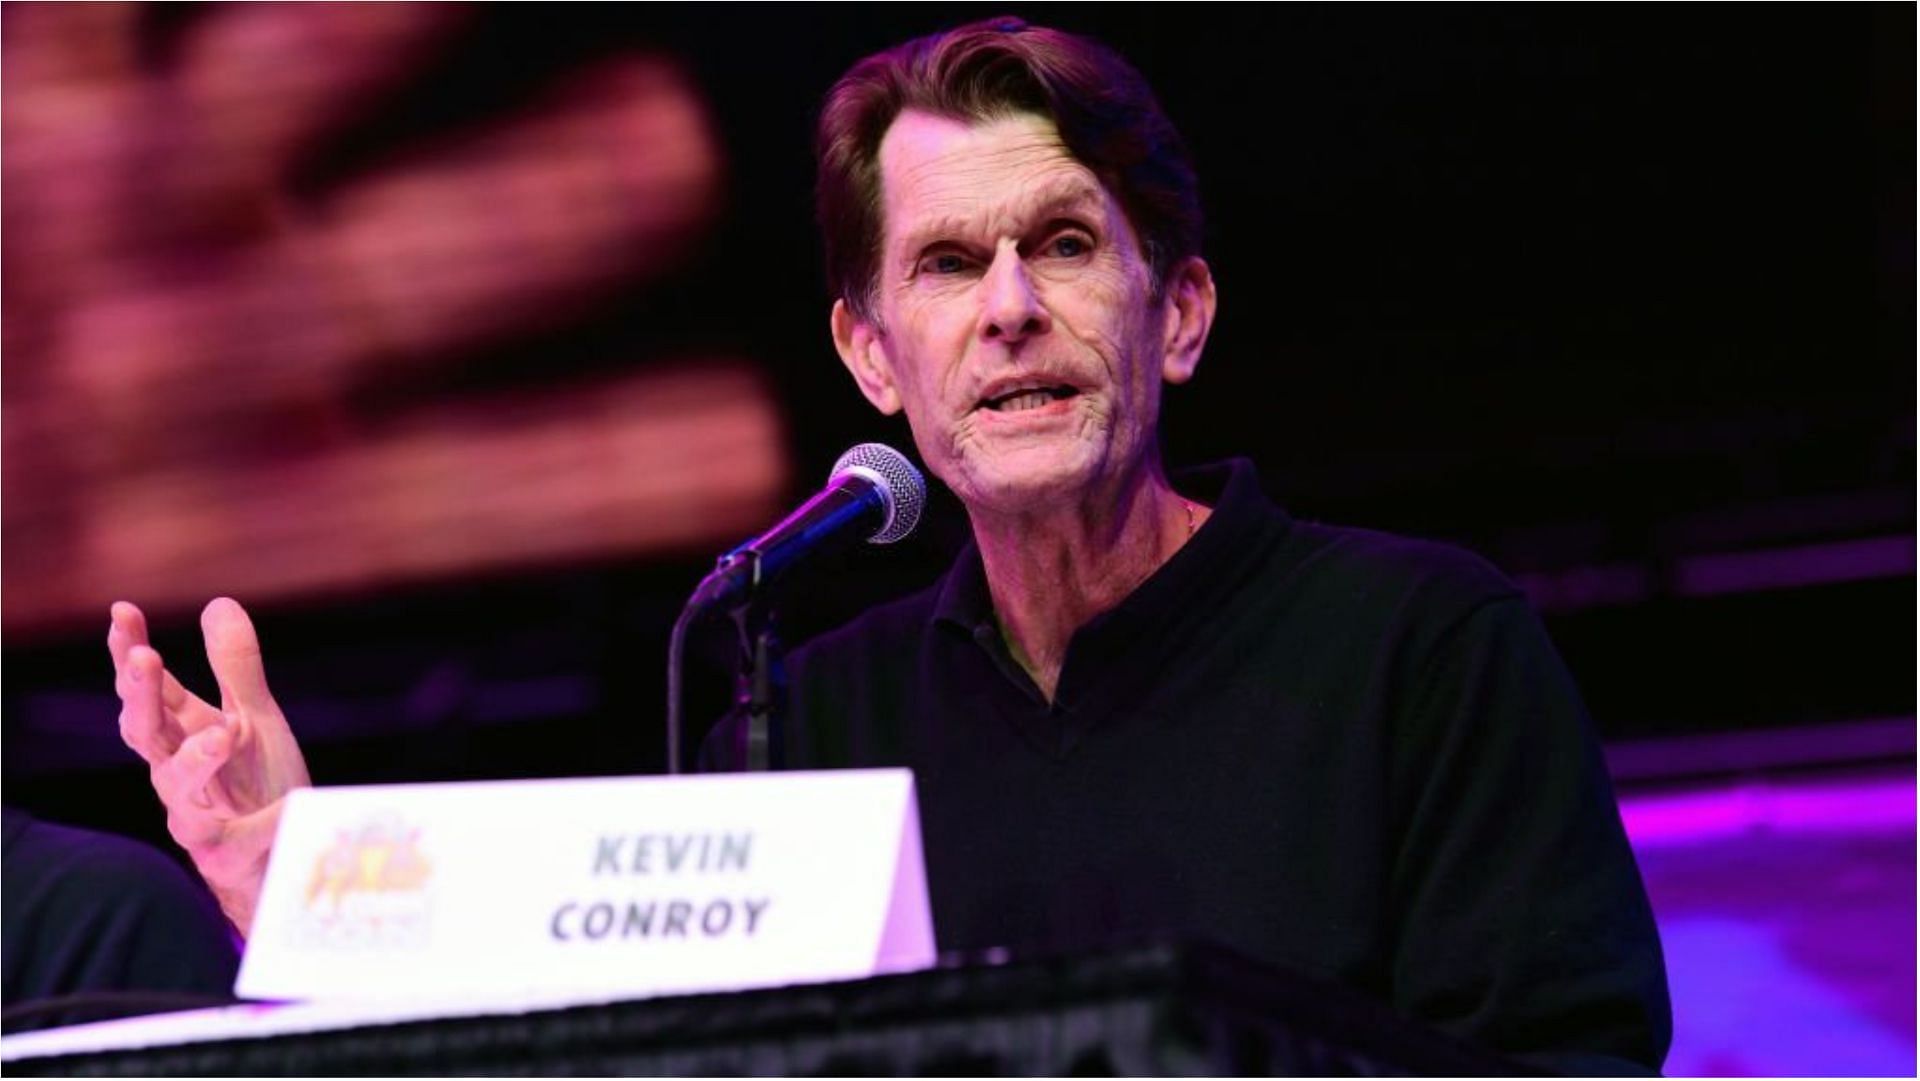 Kevin Conroy died of intestinal cancer (Image via Chelsea Guglielmino/Getty Images)